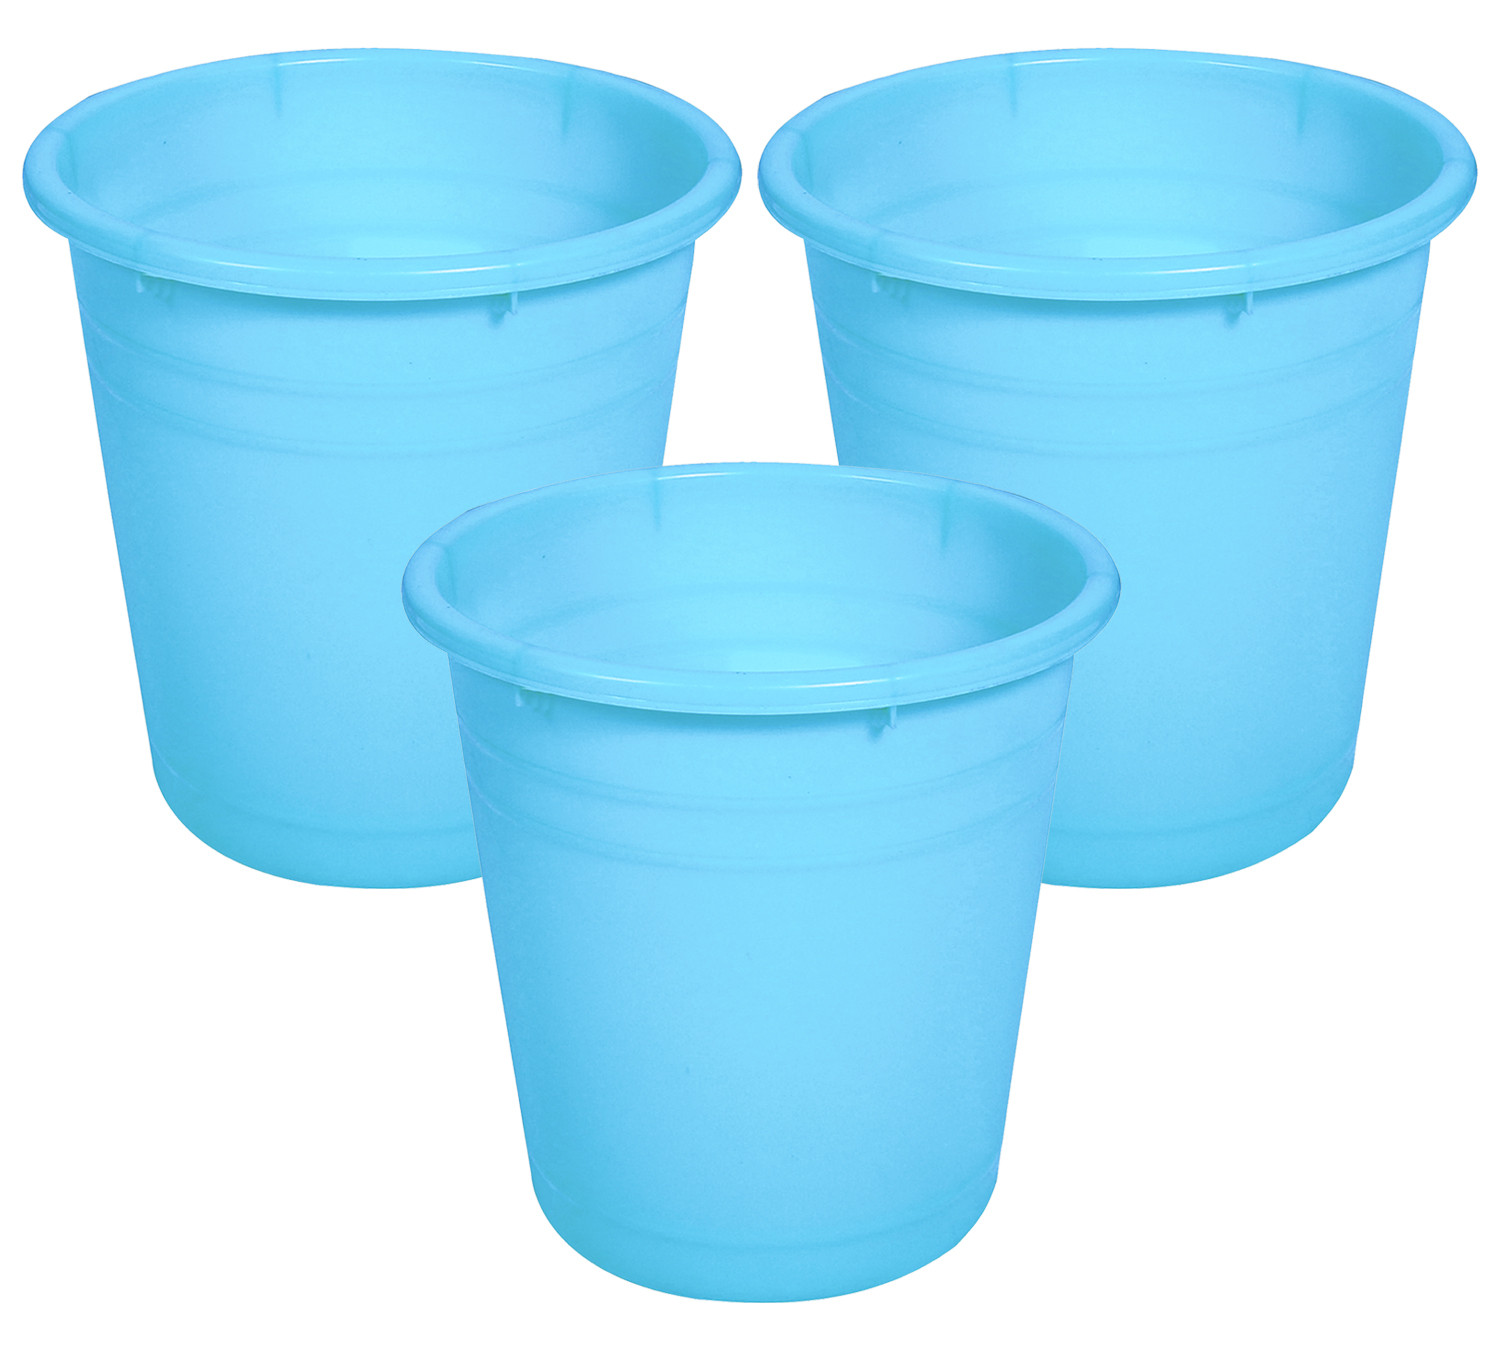 Kuber Industries Plastic Dustbin|Portable Garbage Basket & Round Trash Can for Home,Kitchen,Office,College,7 Ltr.(Sky Blue)